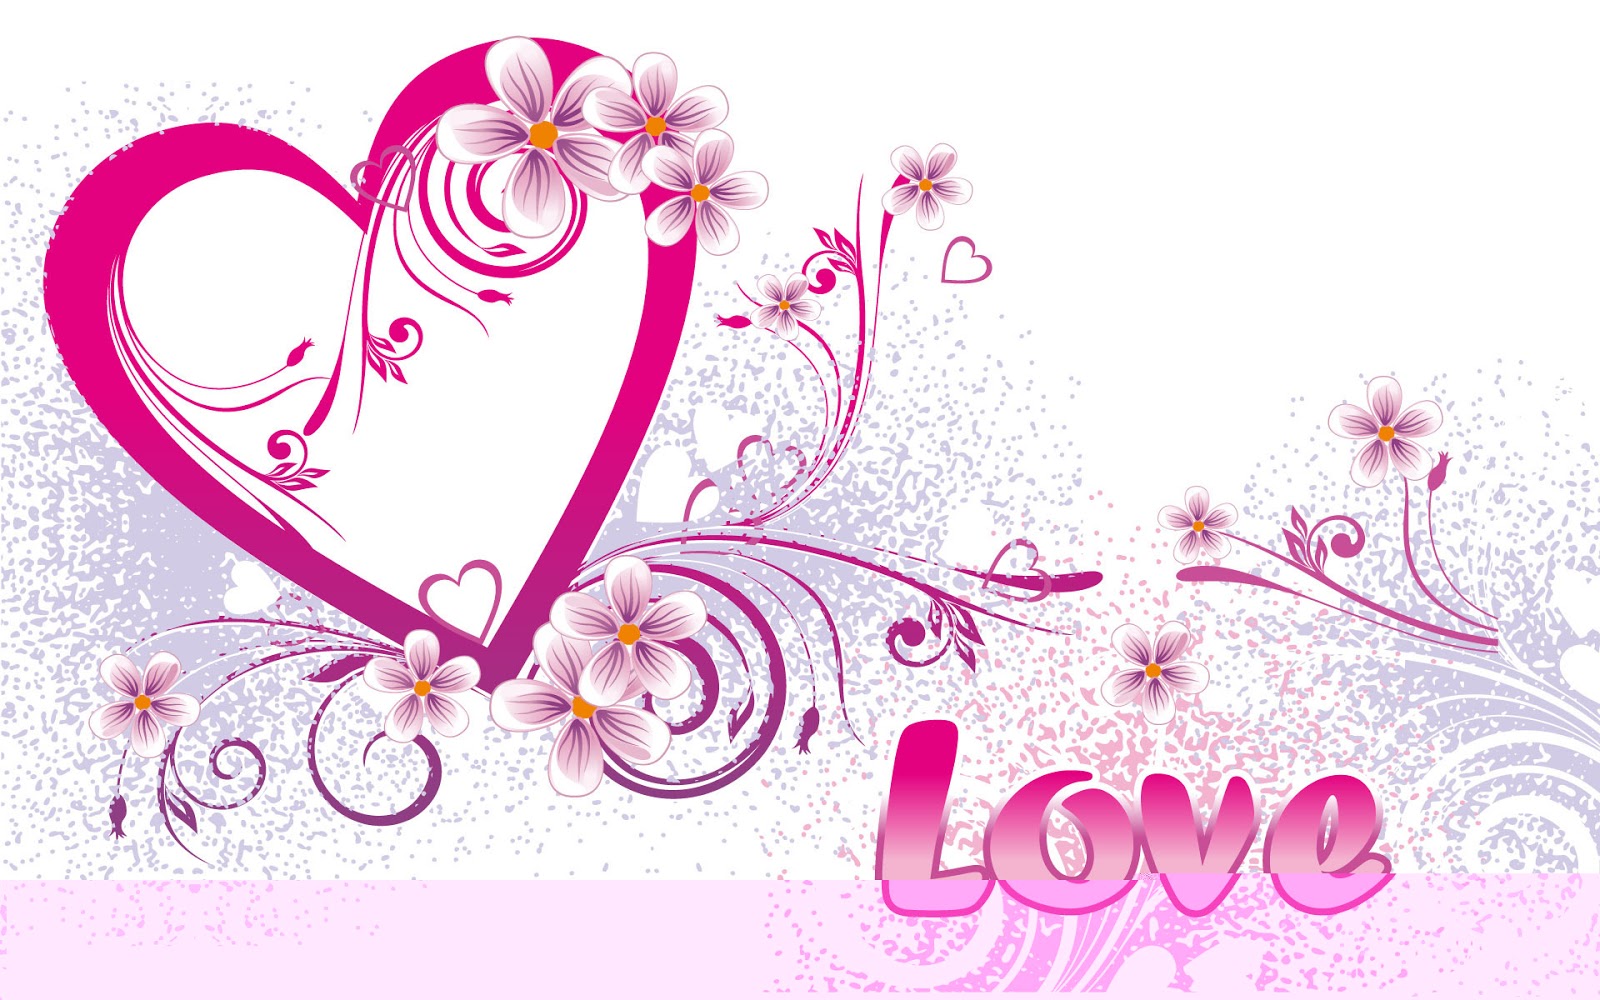 Wallpaper Backgrounds Cute Heart and Love Wallpapers with Different